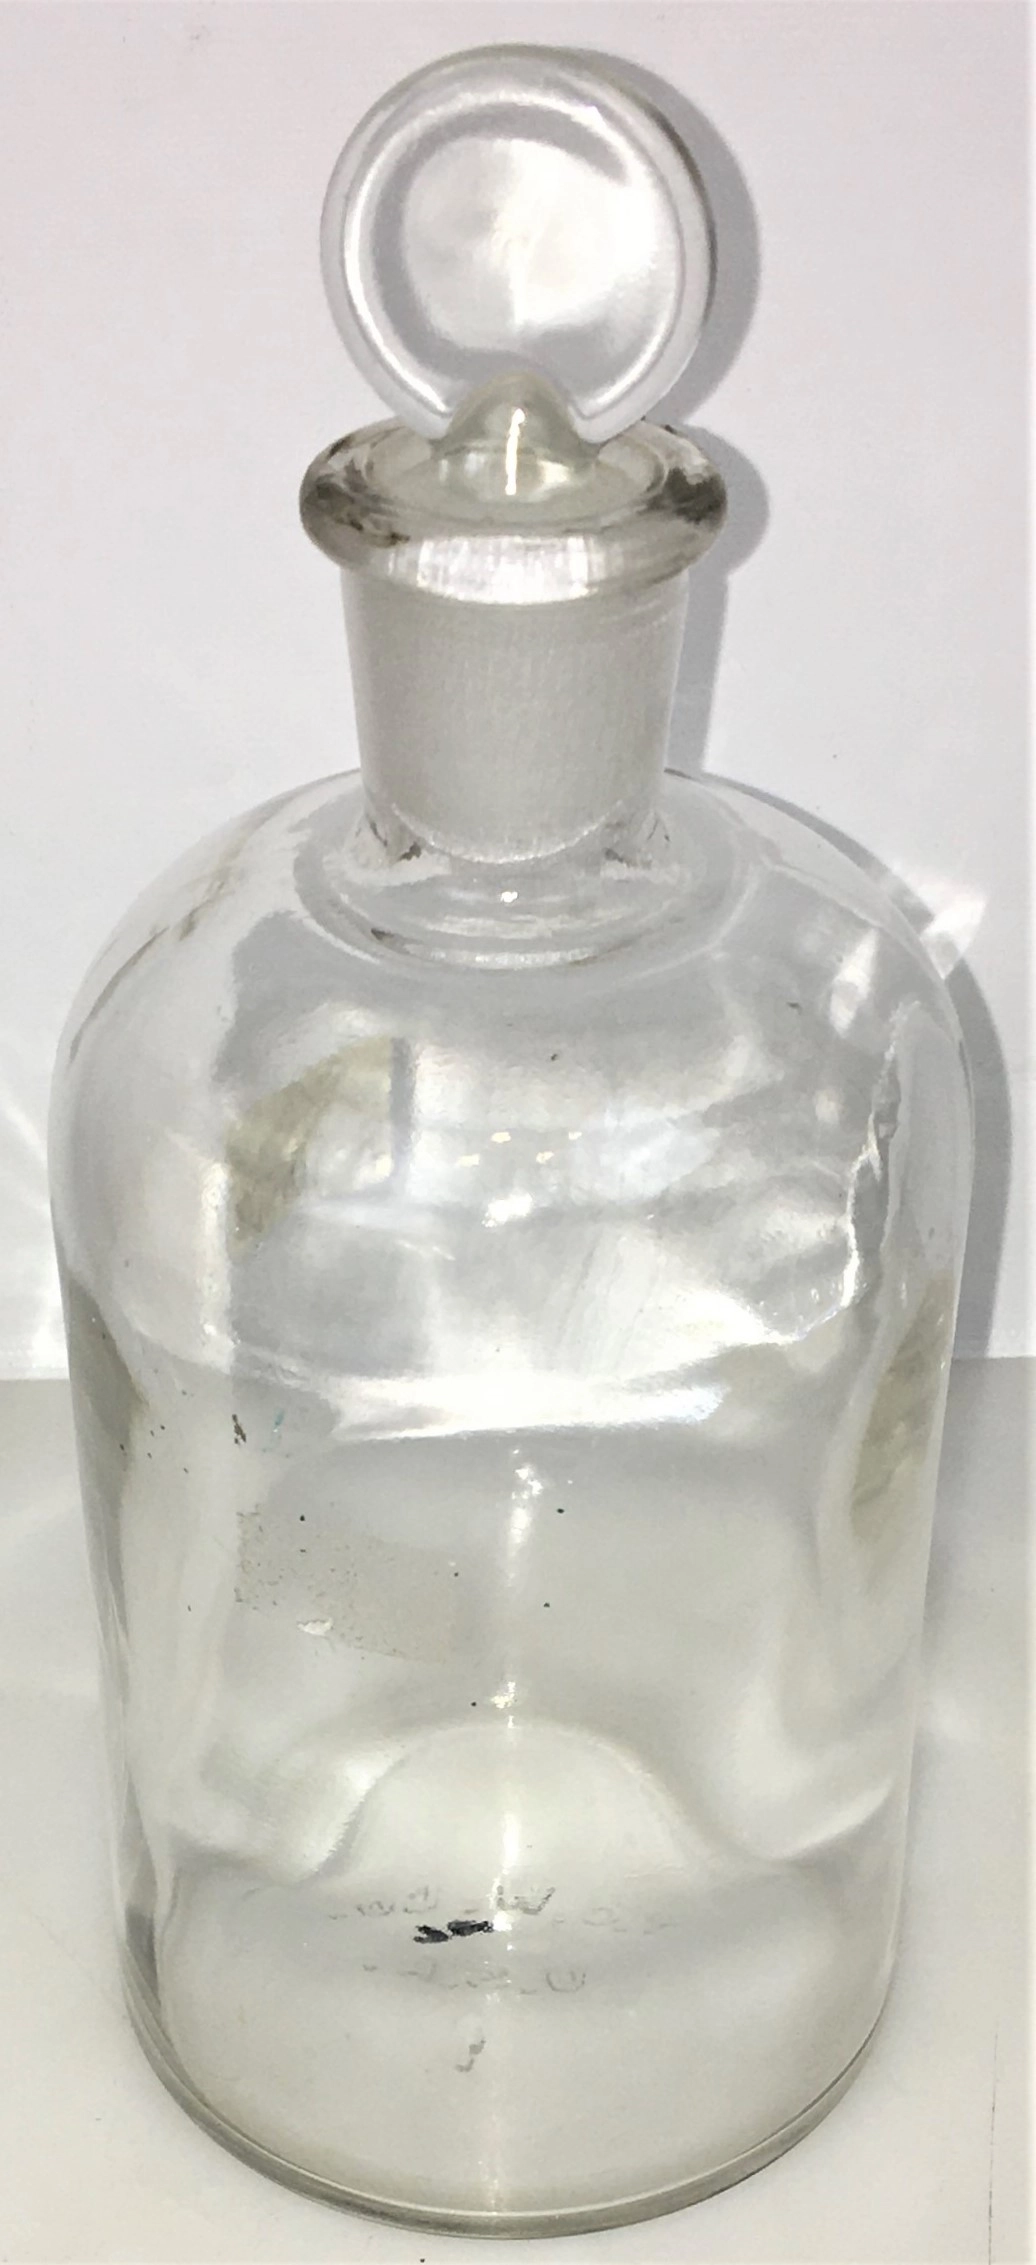 Wheaton 215239 Narrow-Mouth Reagent Bottle with Glass Stopper - 500mL